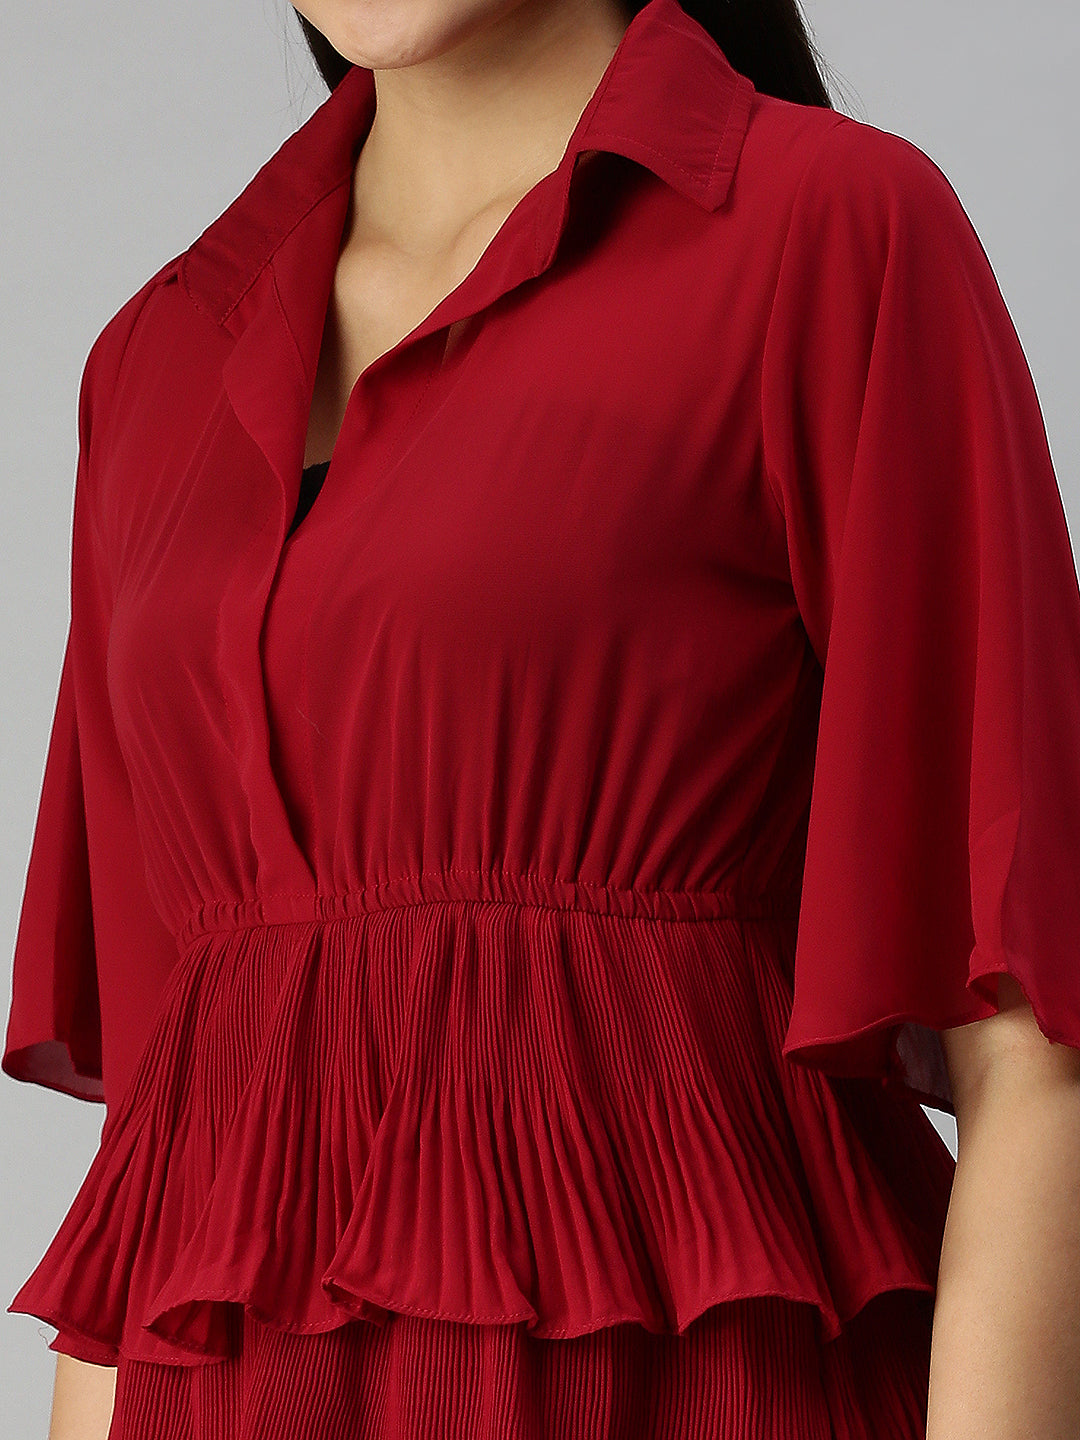 Women Solid Fit and Flare Maroon Dress